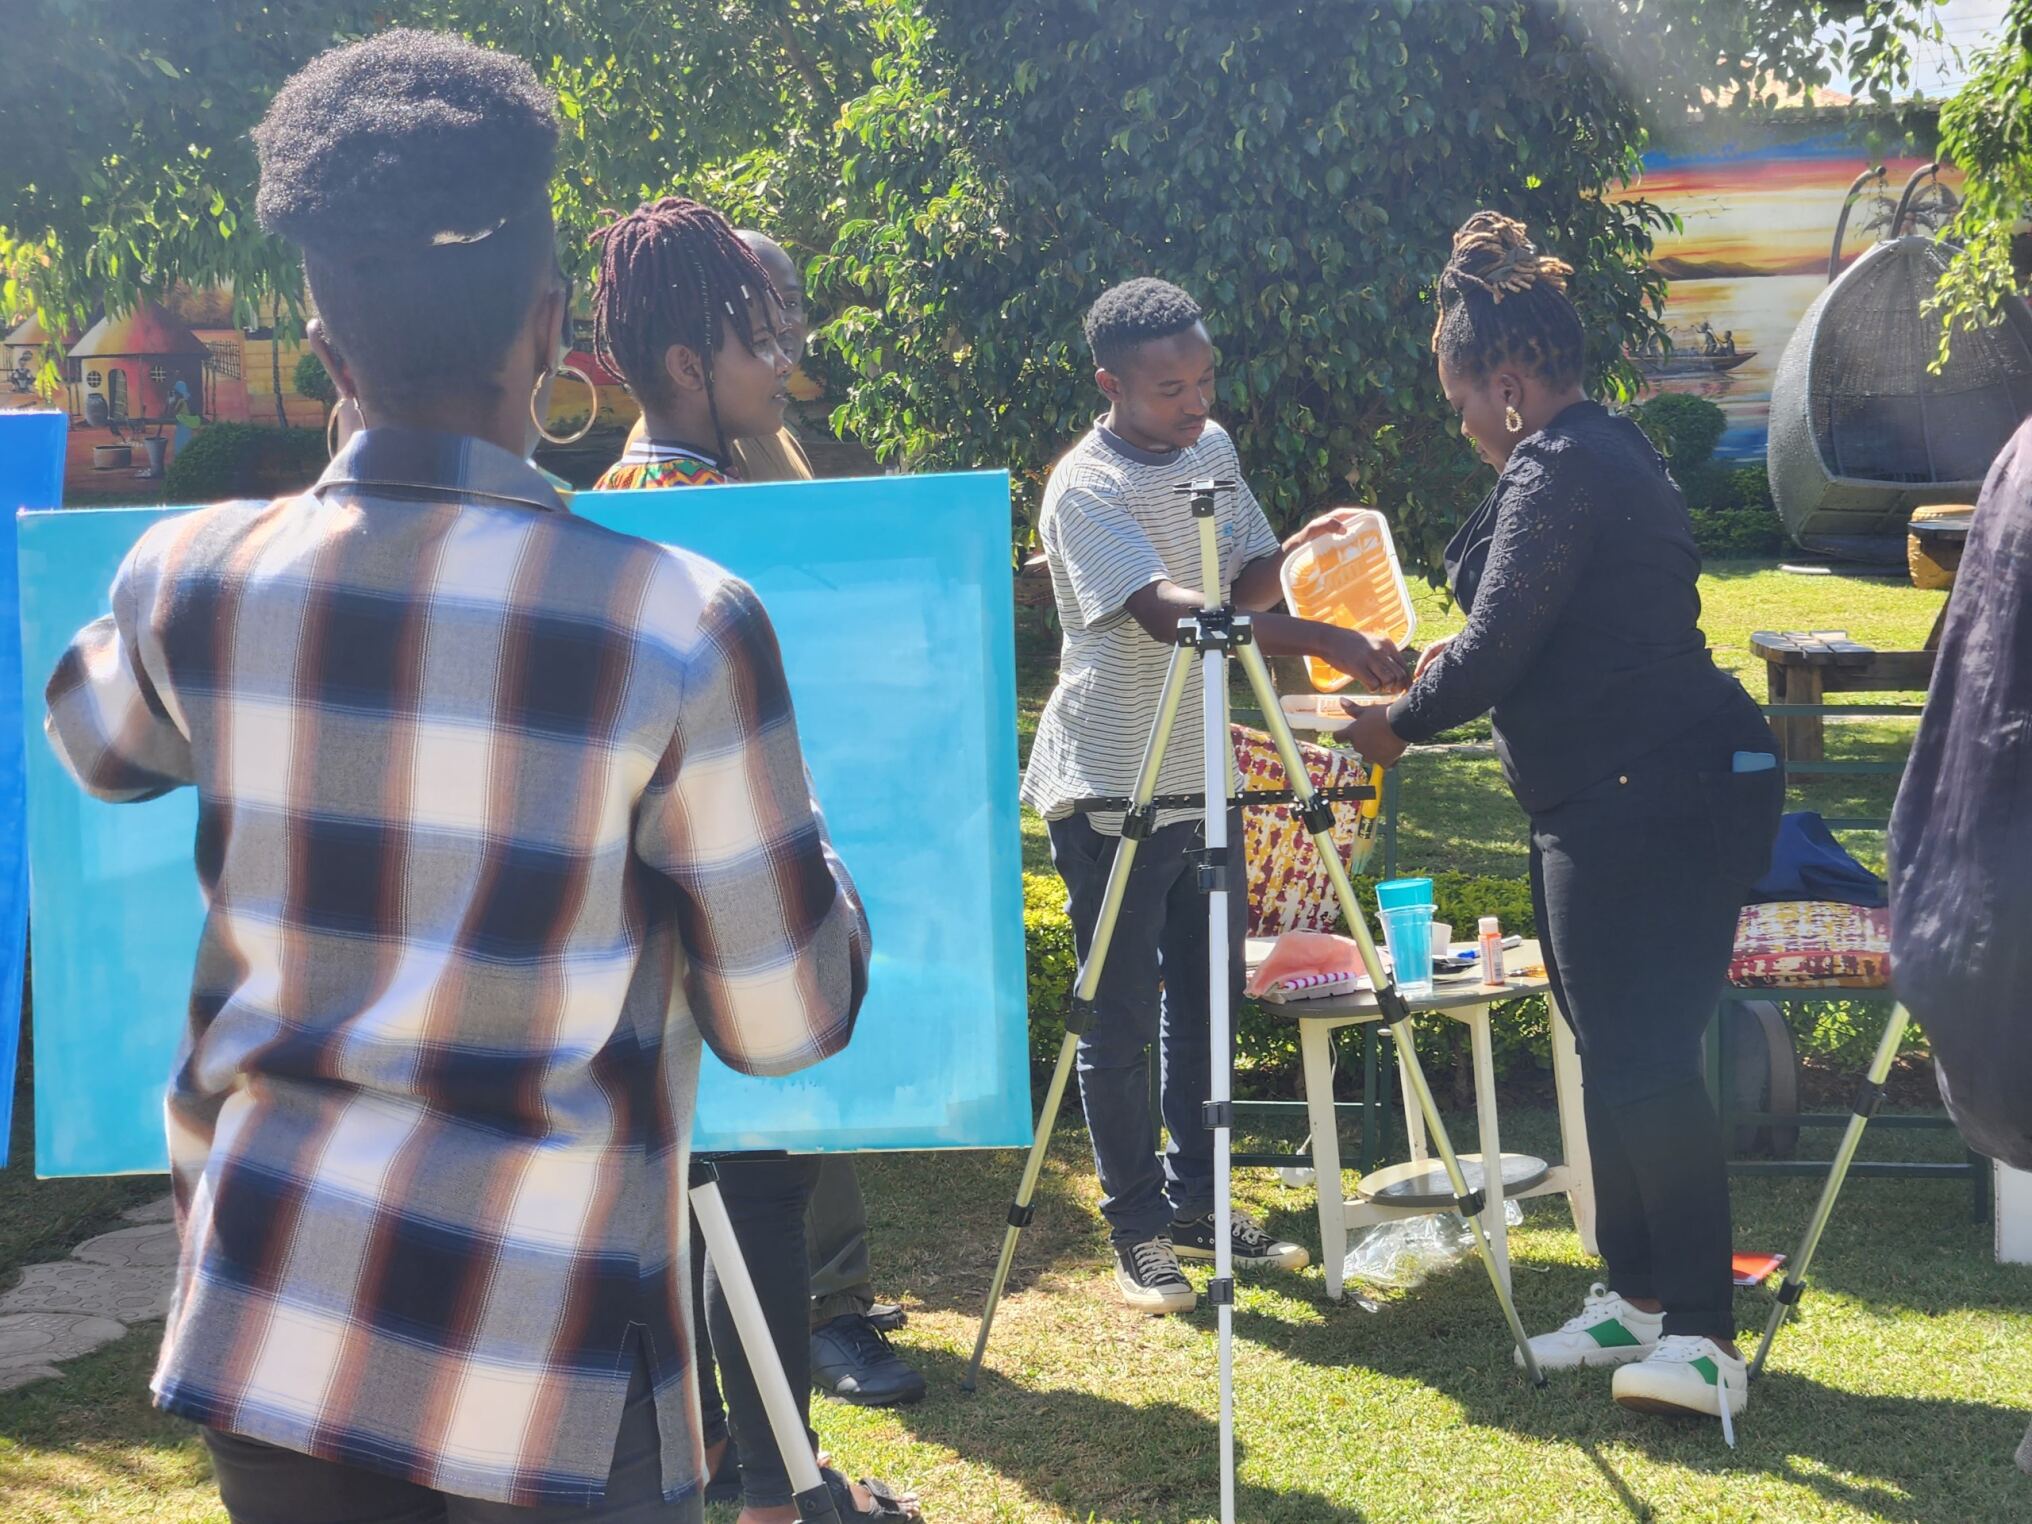 In Lilongwe, Davis and Jean-Pierre led a workshop for a number of Malawian professional artists.